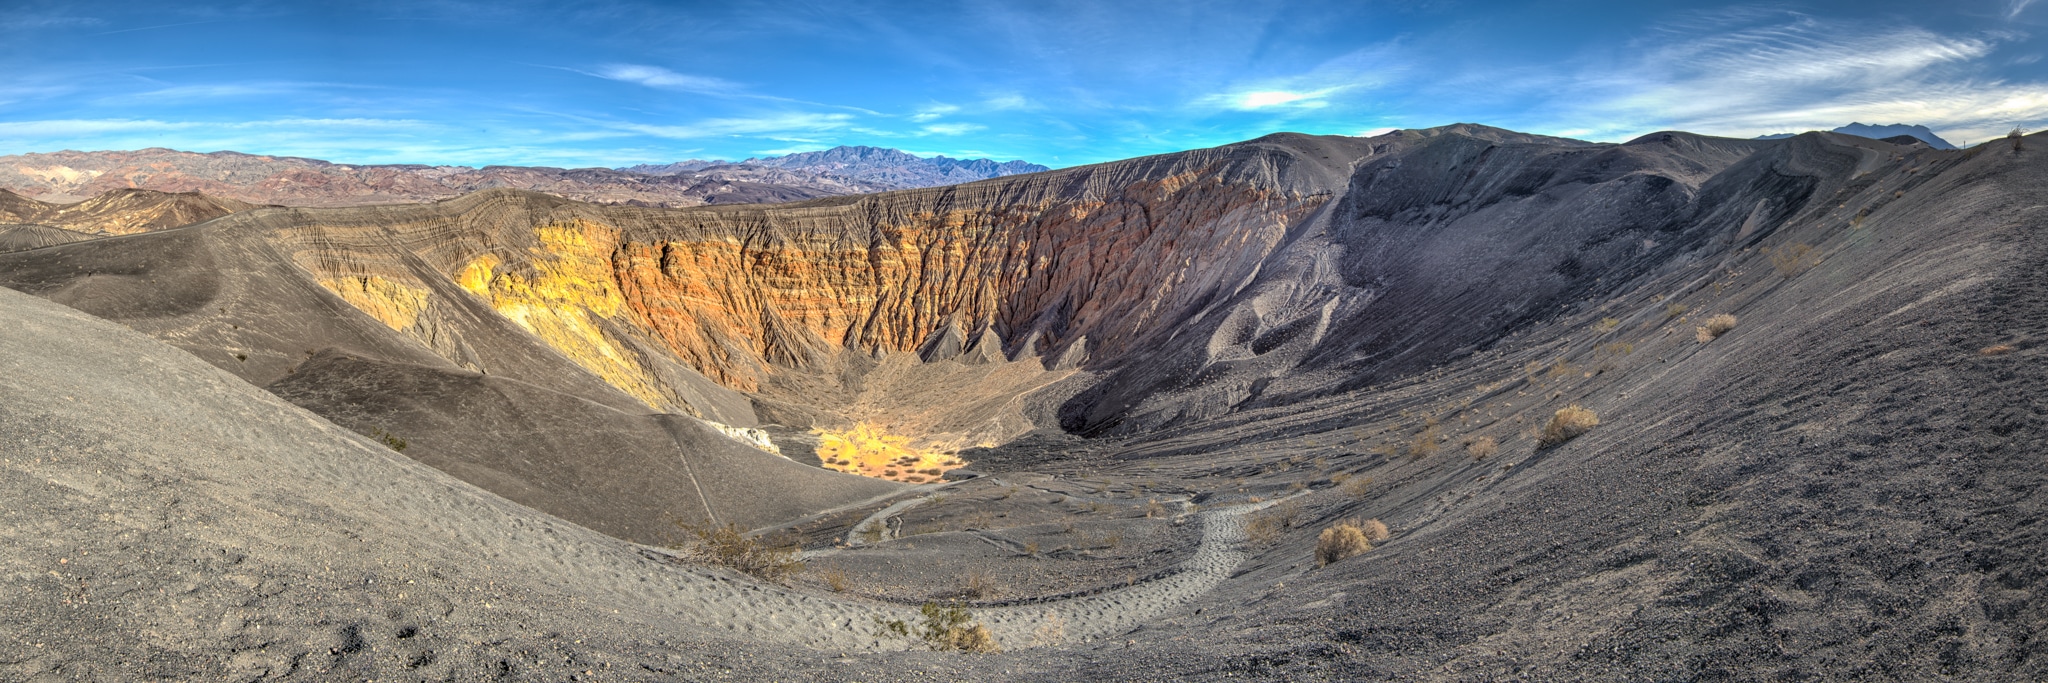 Photographs of Death Valley National Park in Winter